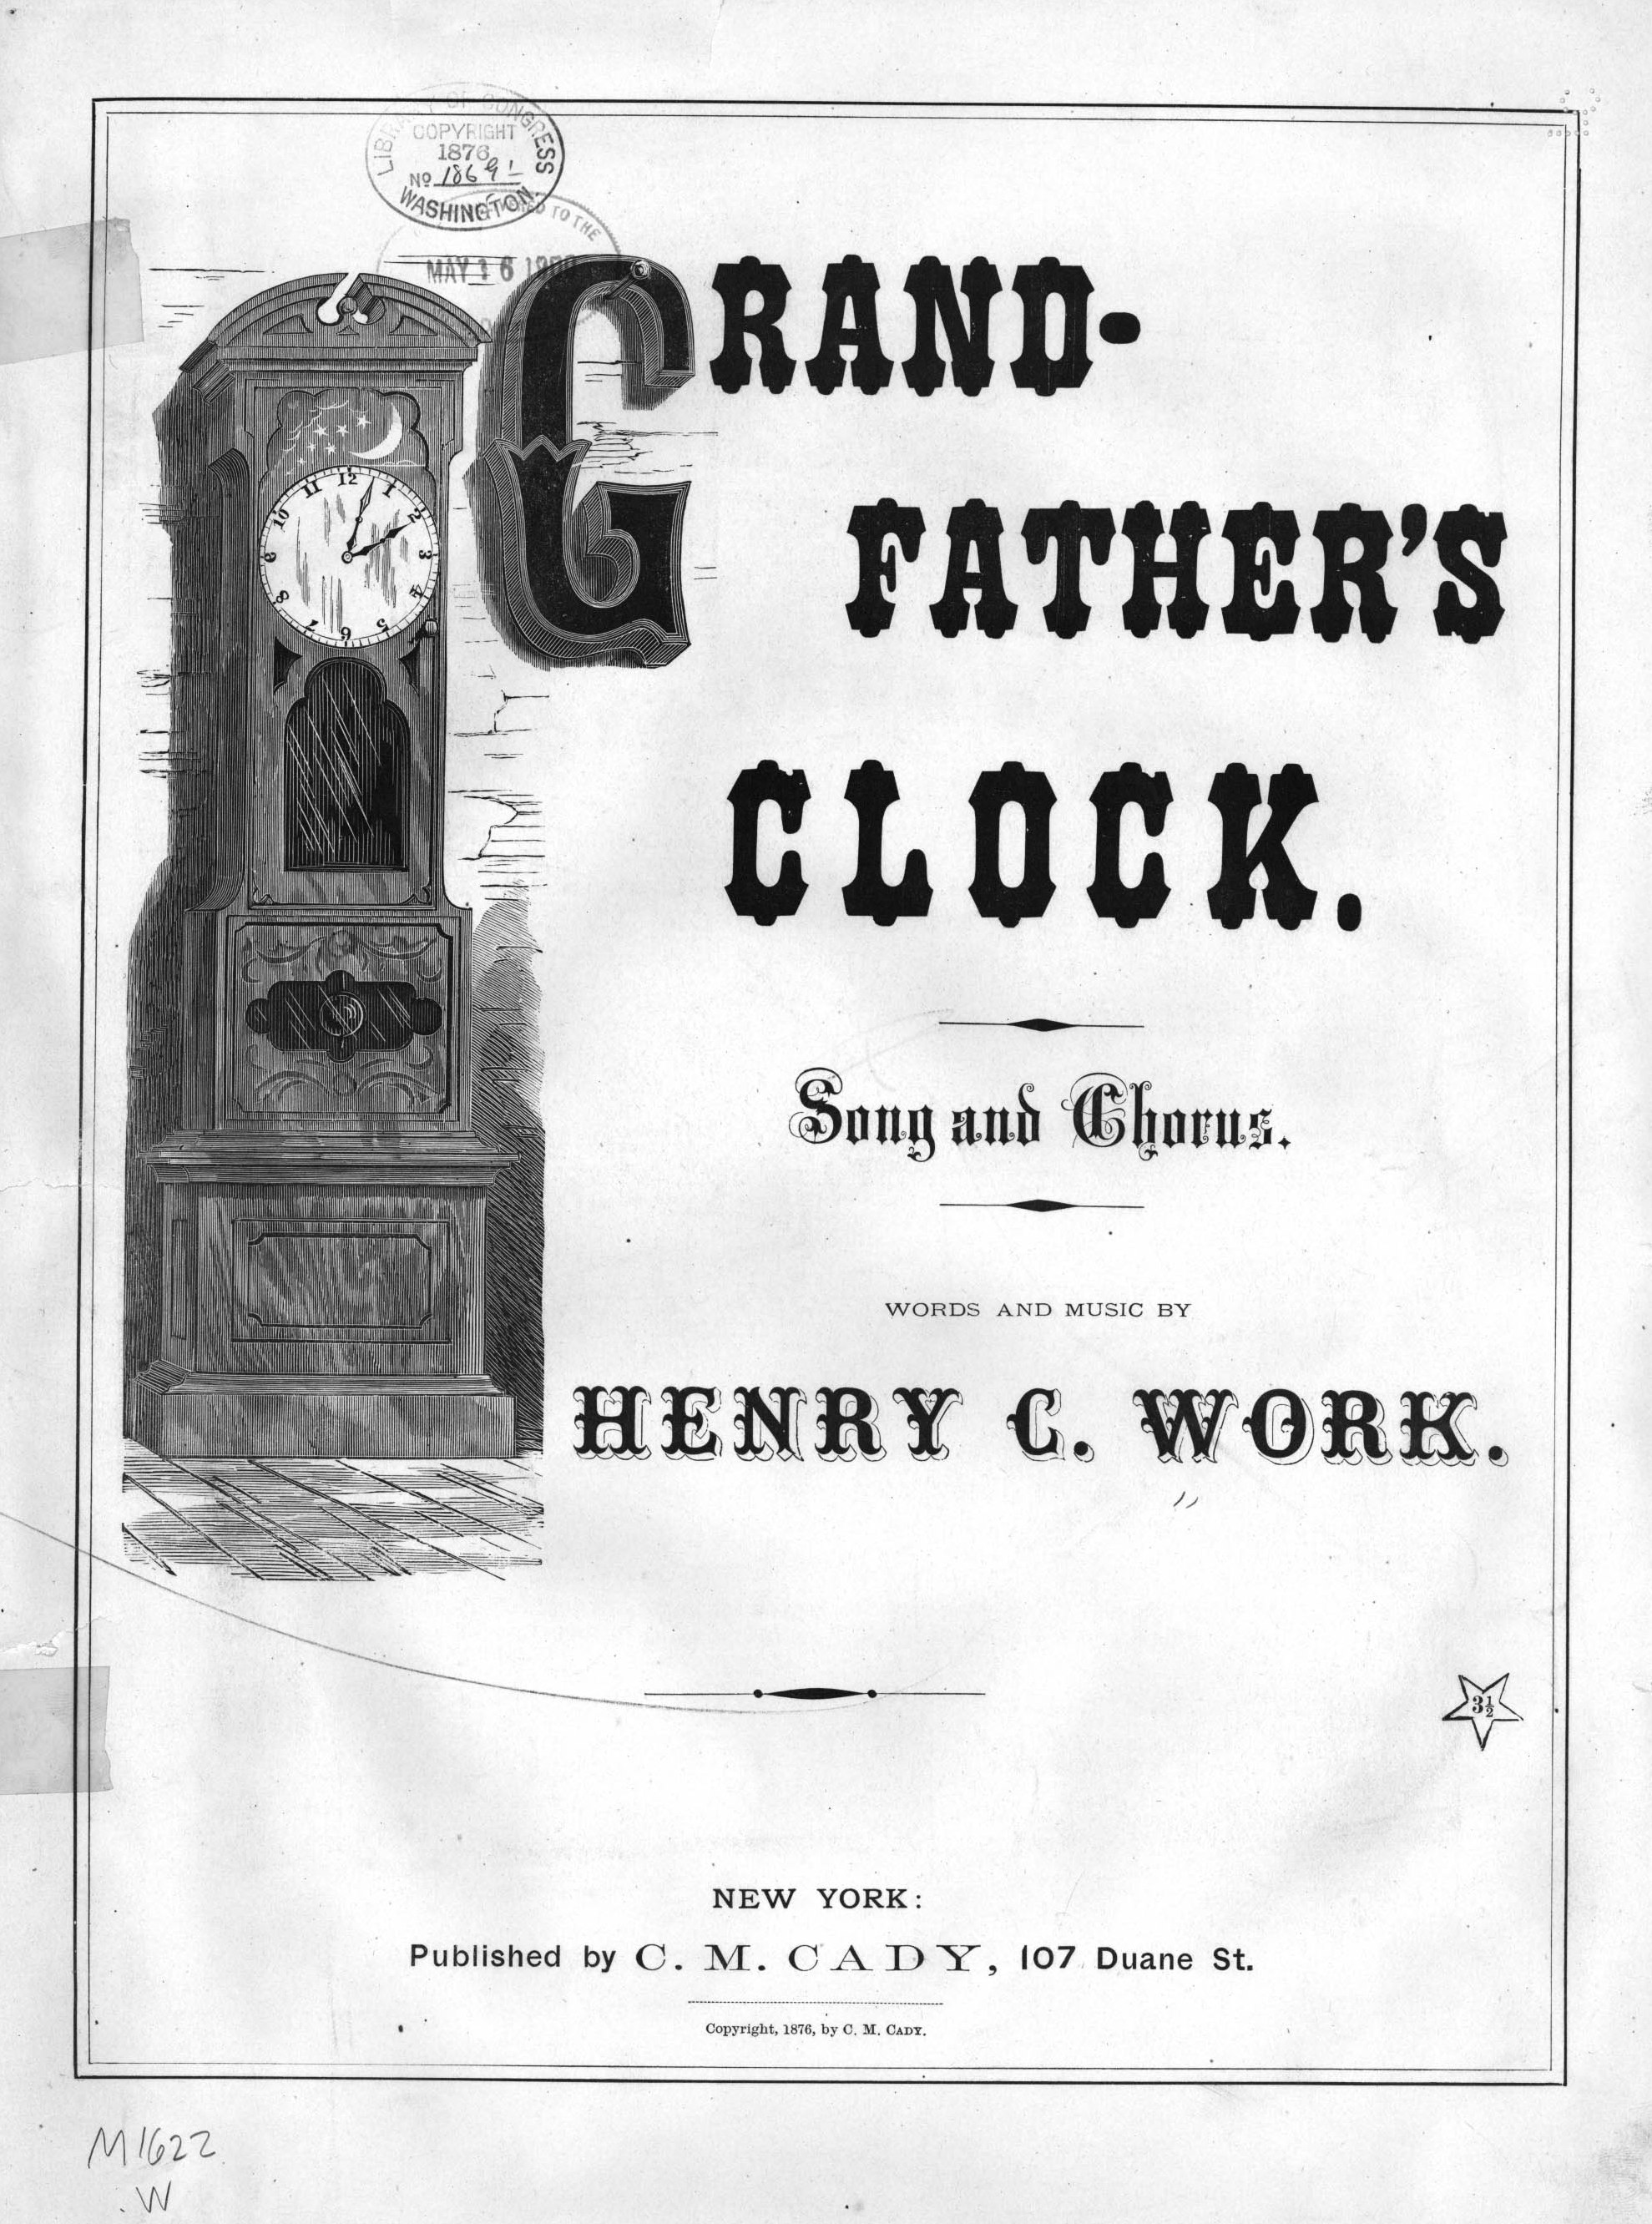 Granfather's Clock by Henry Clay Work